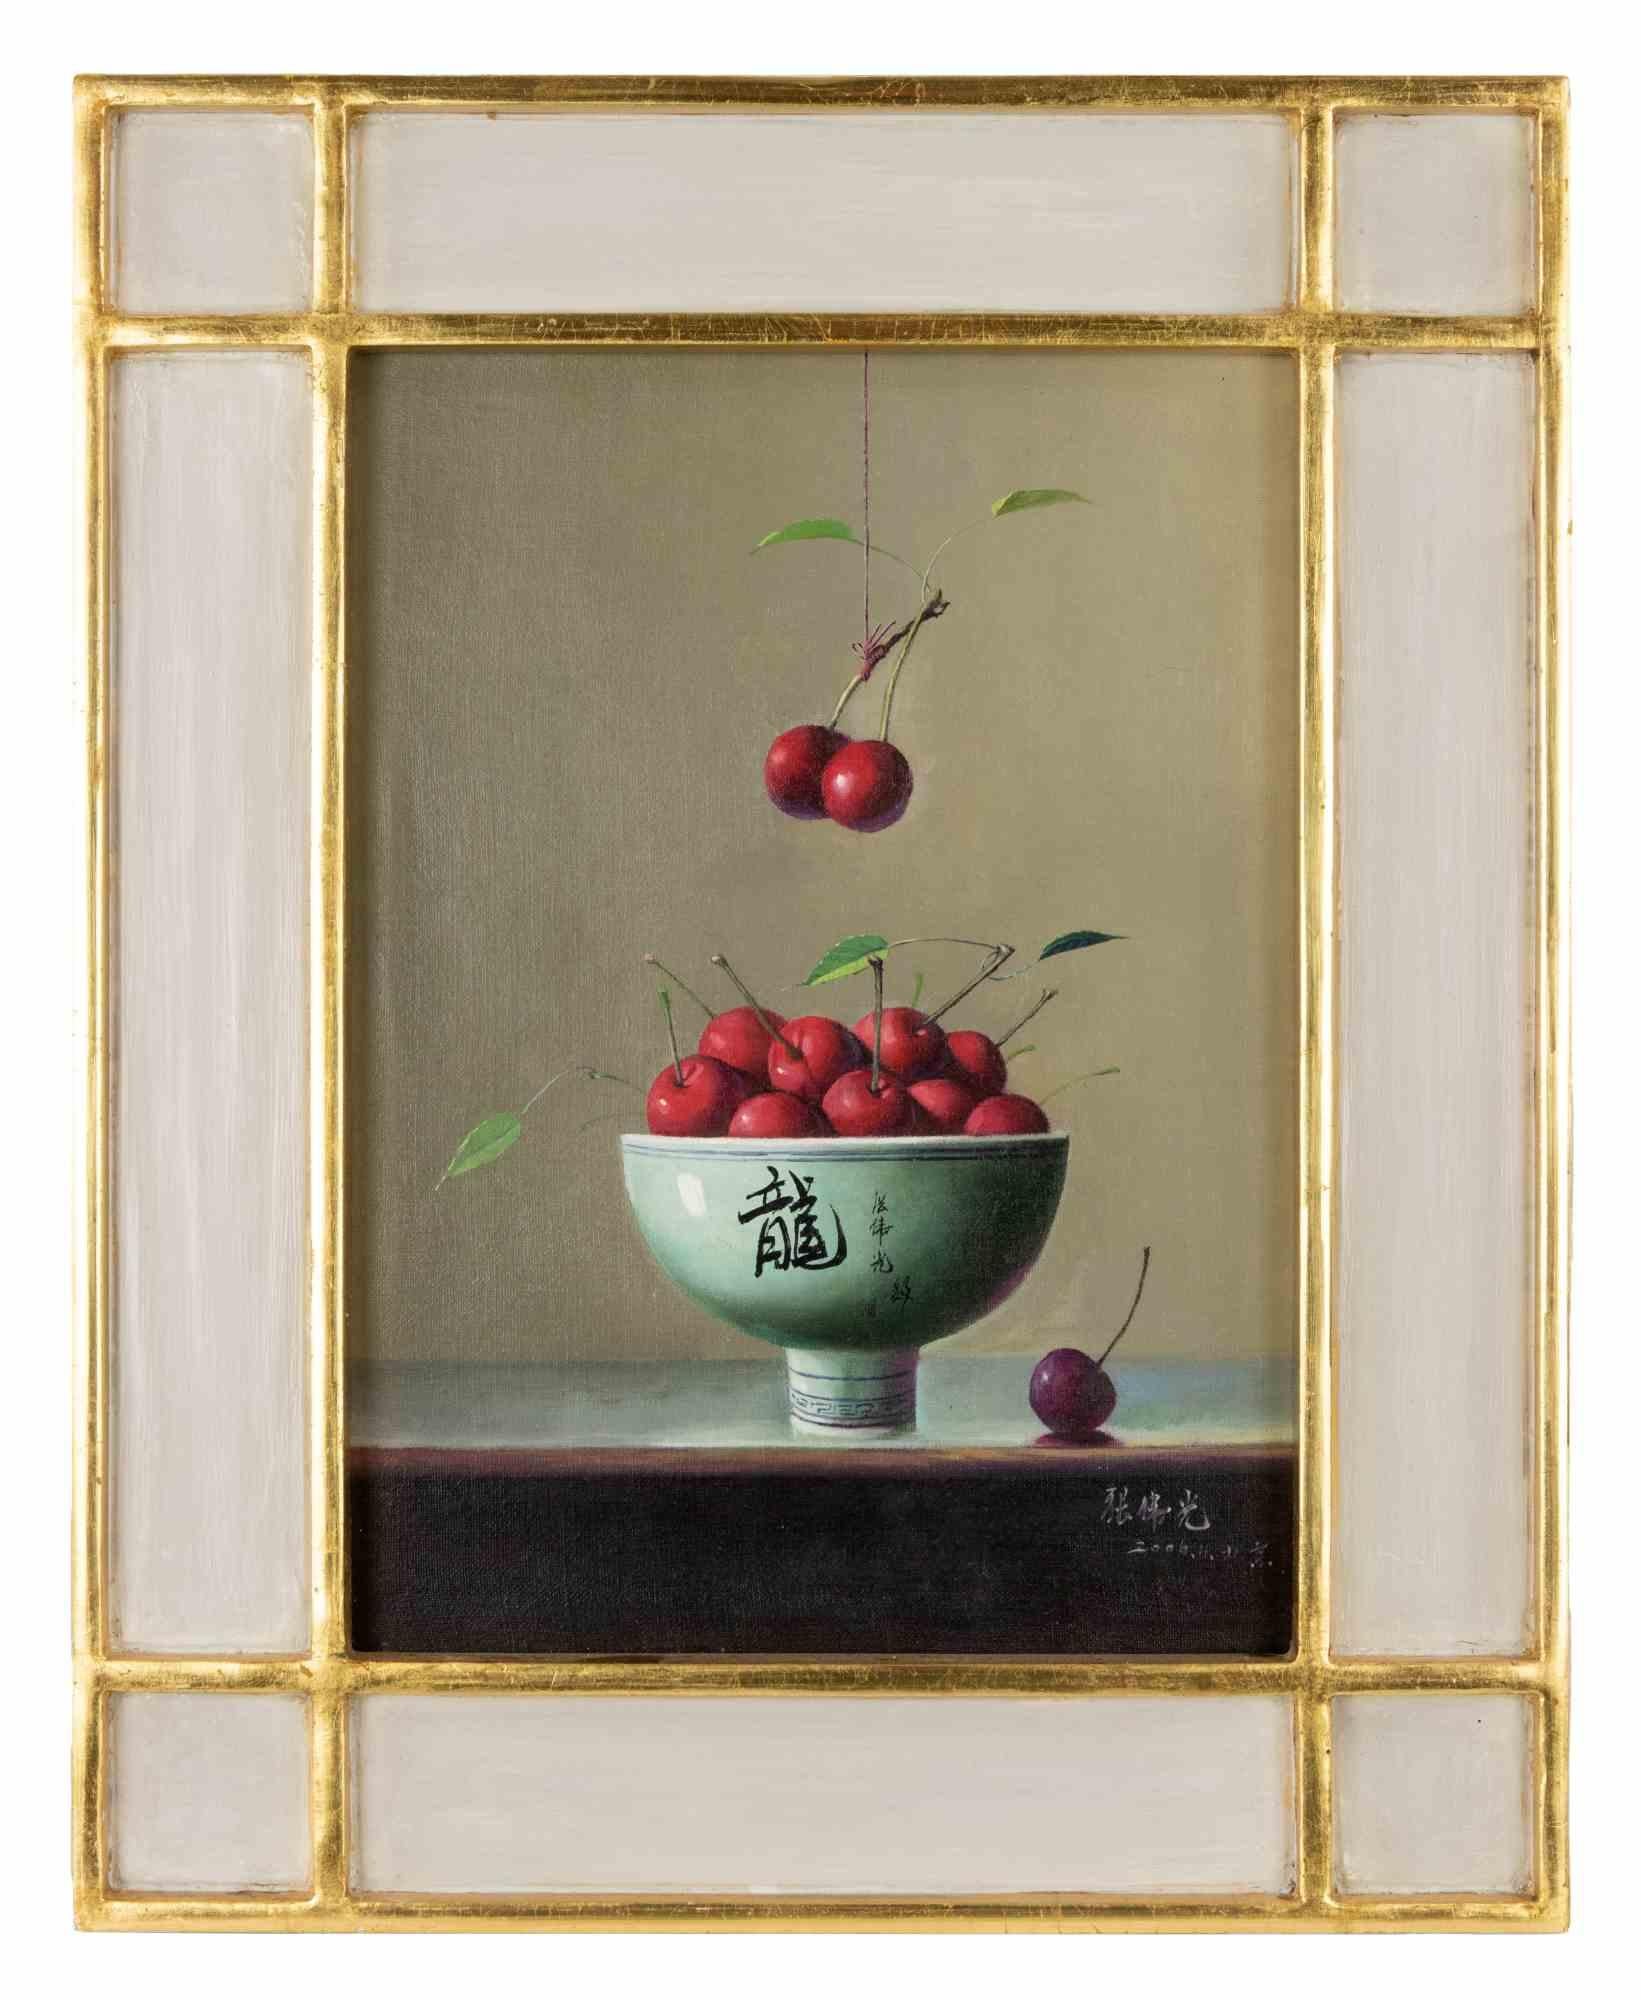 Cherries is an original oil painting realized  by Zhang Wei Guang (Mirror) in 2006.

Includes frame.

Hand signed and dated on the lower right margin.

Good conditions.

Zhang Wei Guang , also called ‘mirror' was born in Helong Jang, China in 1968.